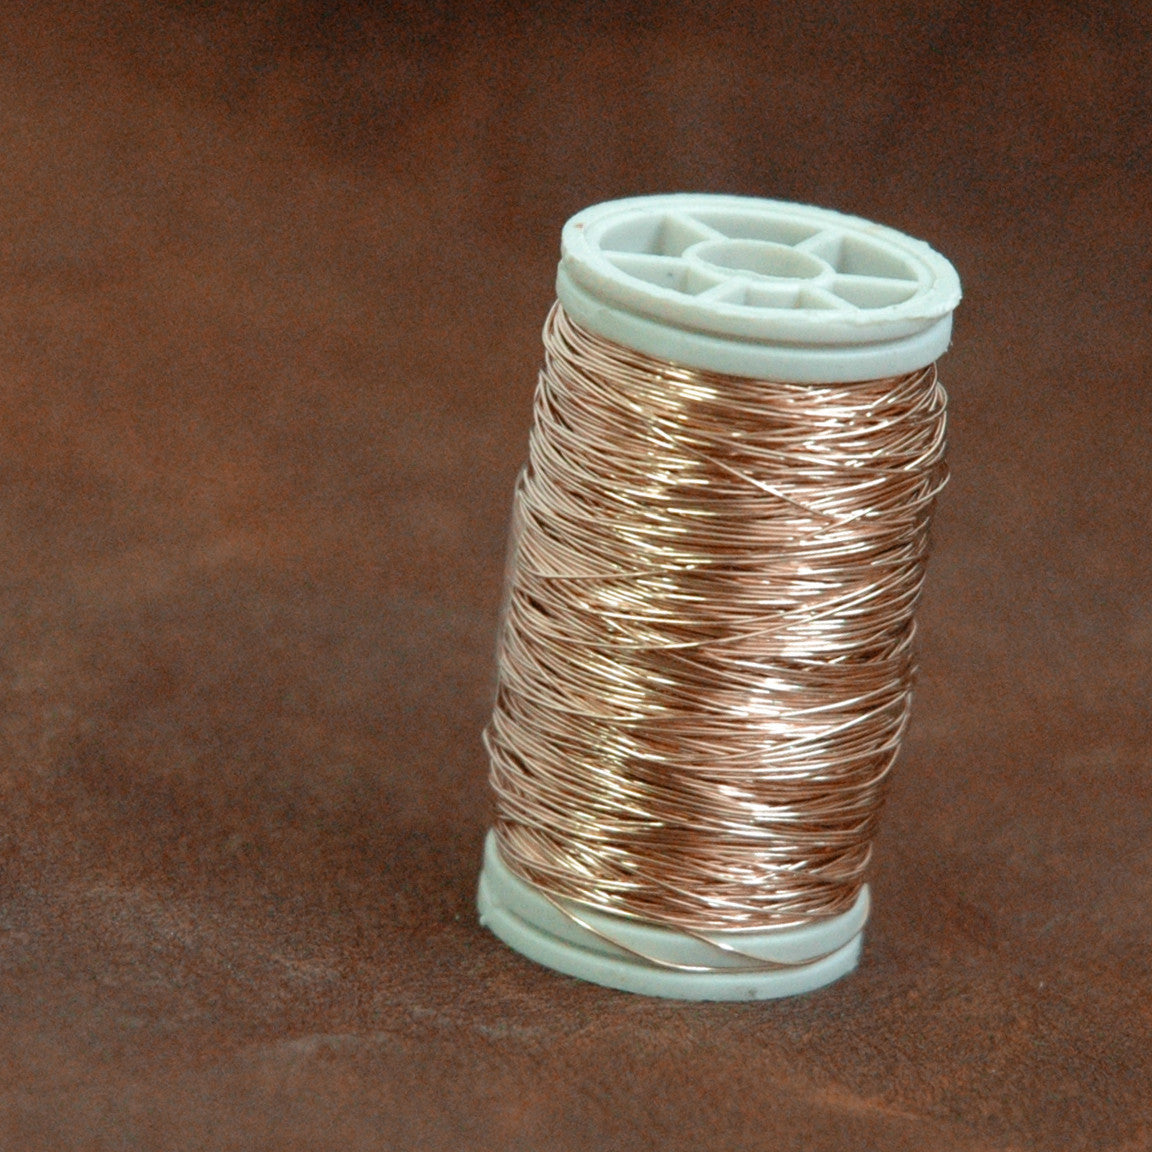 Rose Gold filled wire , dead soft rose gold filled wire, 28gauge , wire crochet supplies, gold wire, 80ft 26 yard - Yooladesign